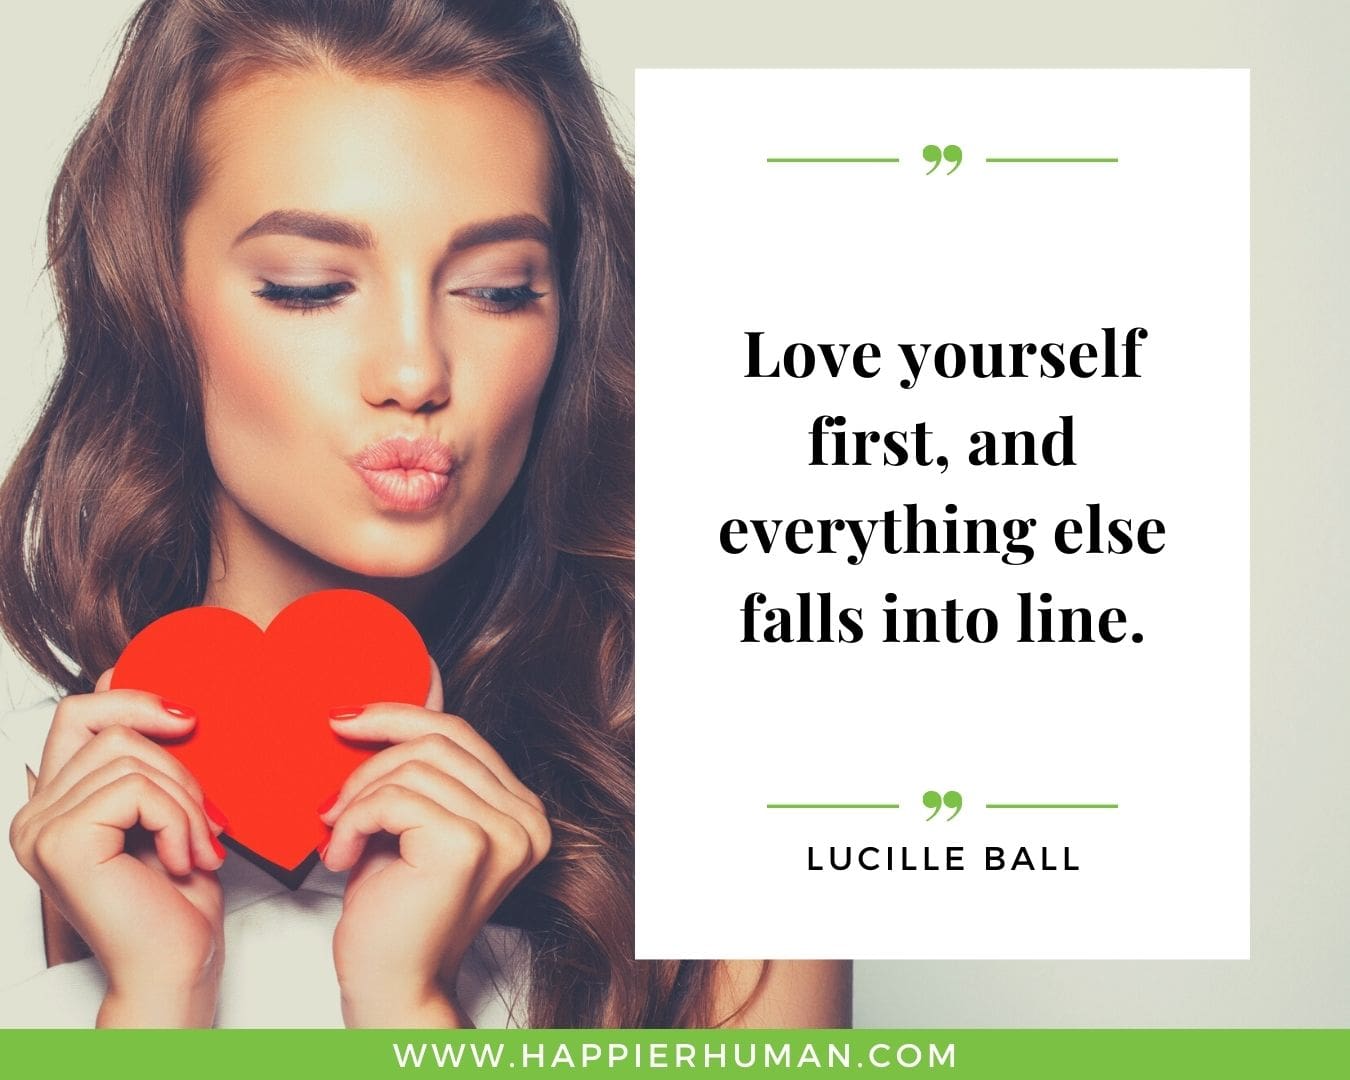 Toxic People Quotes - “Love yourself first, and everything else falls into line.” – Lucille Ball